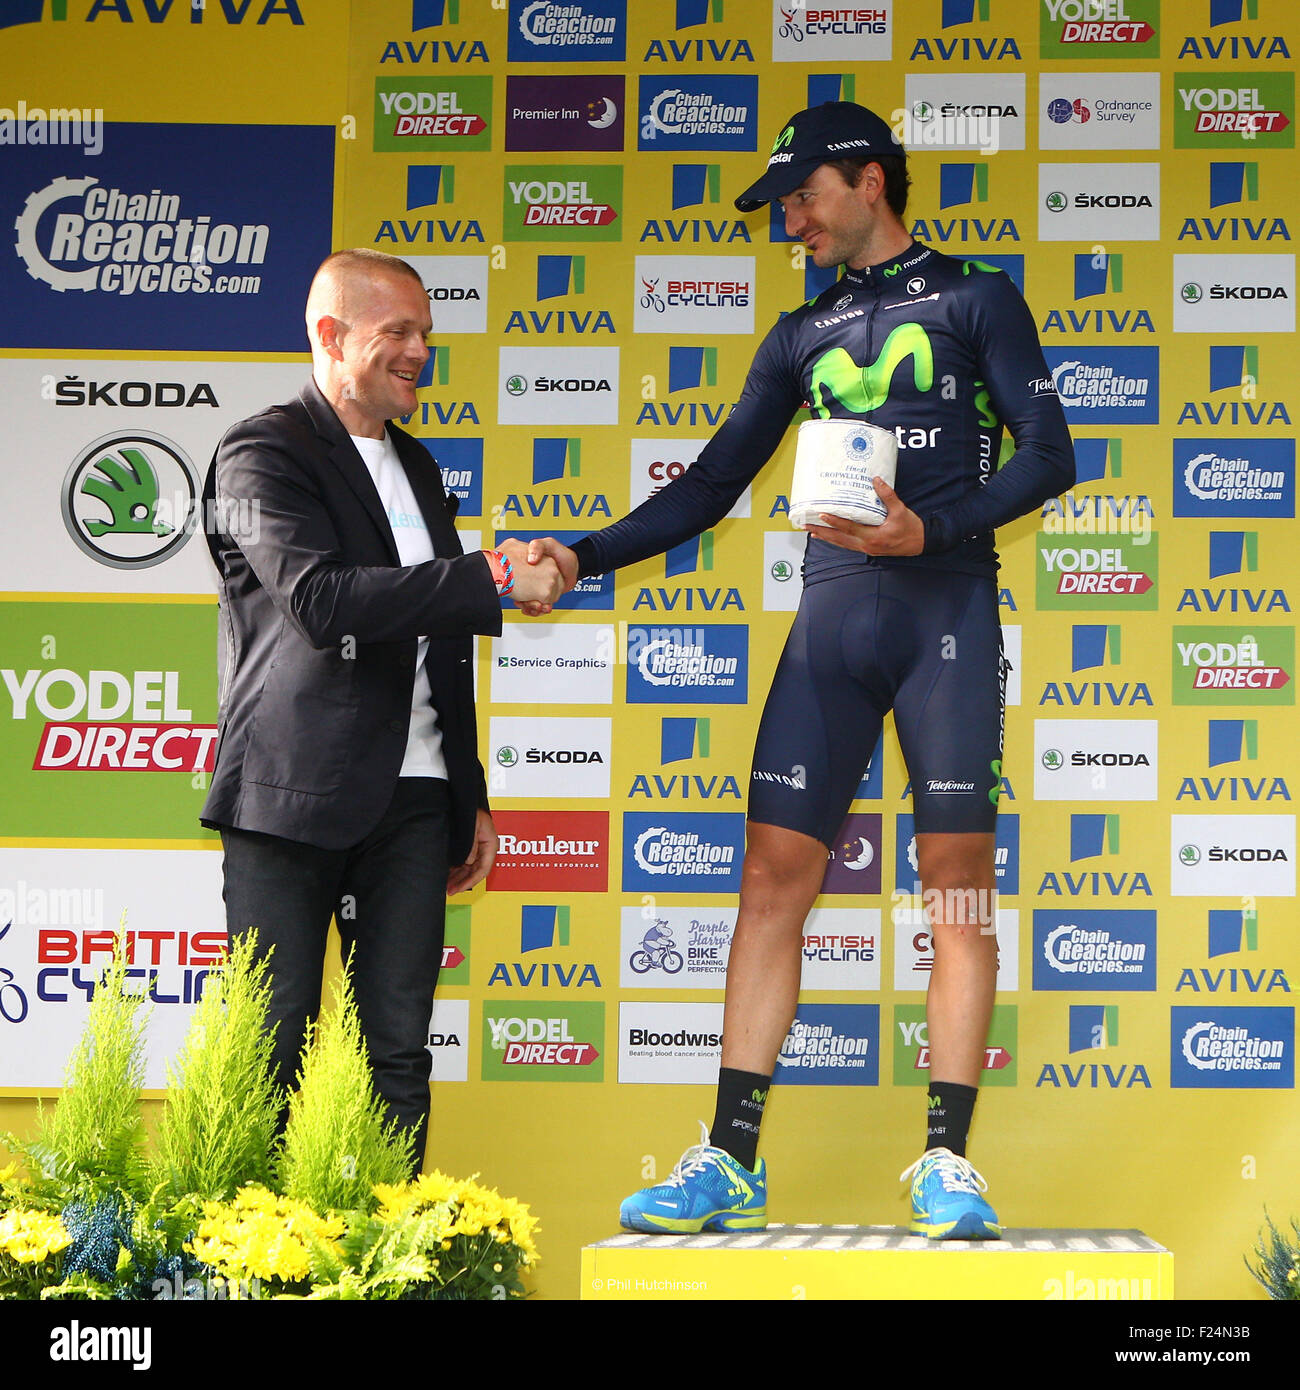 Stoke, UK. 11th Sep, 2015. Tour Of Britain Stage Six. Stoke to Nottingham. Gorka Izaguirre of Moviestar is presented with the Combatitive Award. © Action Plus Sports/Alamy Live News Stock Photo